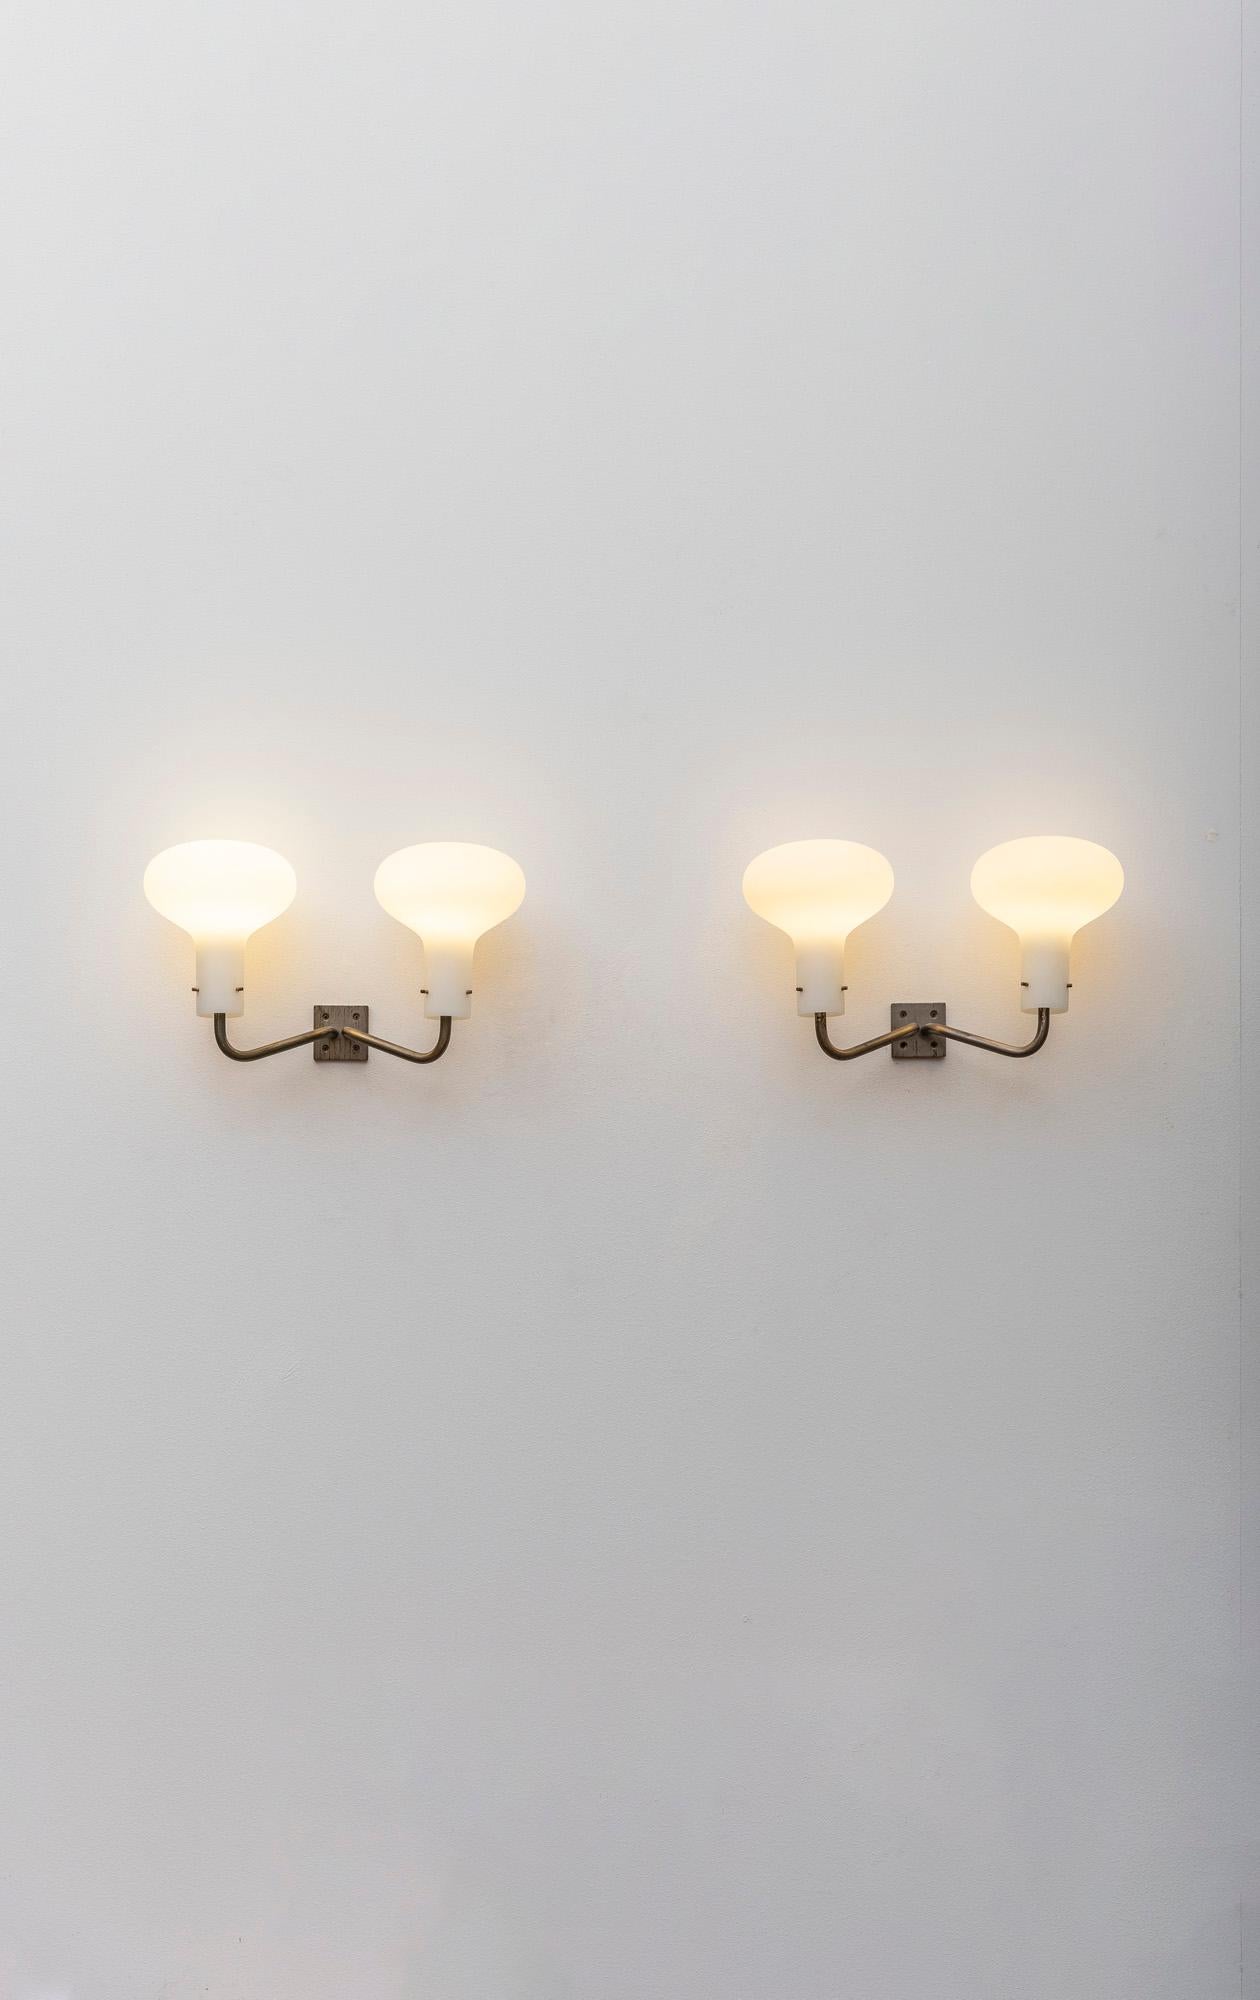 Iconic pair of LP12 wall lights by Ignazio Gardella for Azucena. 
Nickeled brass hardware with two large satin glass diffusers. 
Italy, 1960. 
Very good vintage condition.